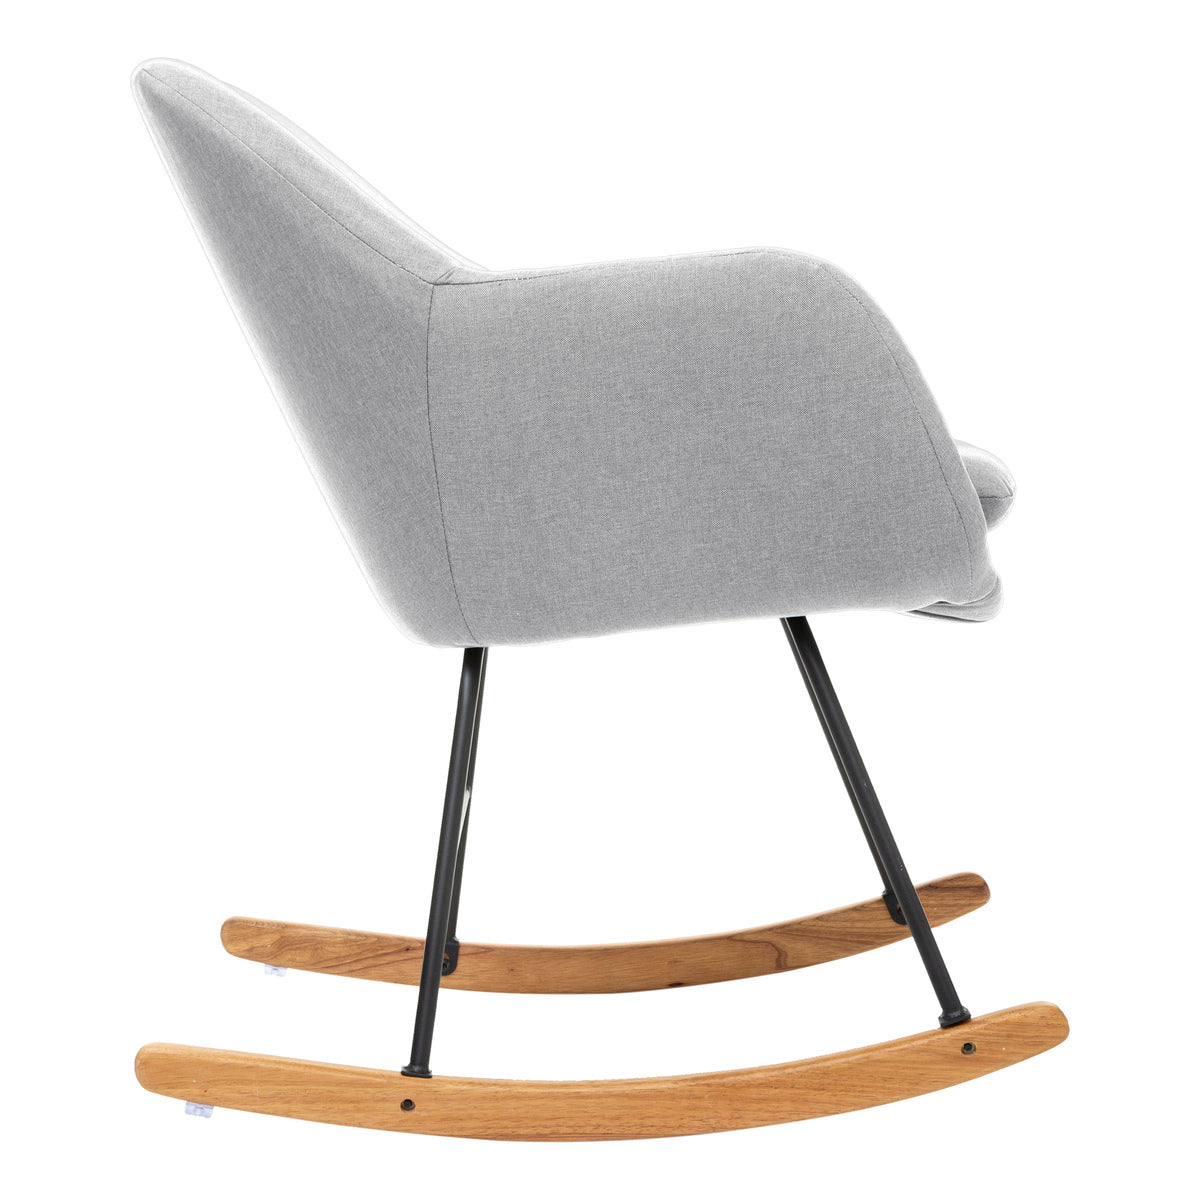 Fauteuil Rocking chair PERA gris